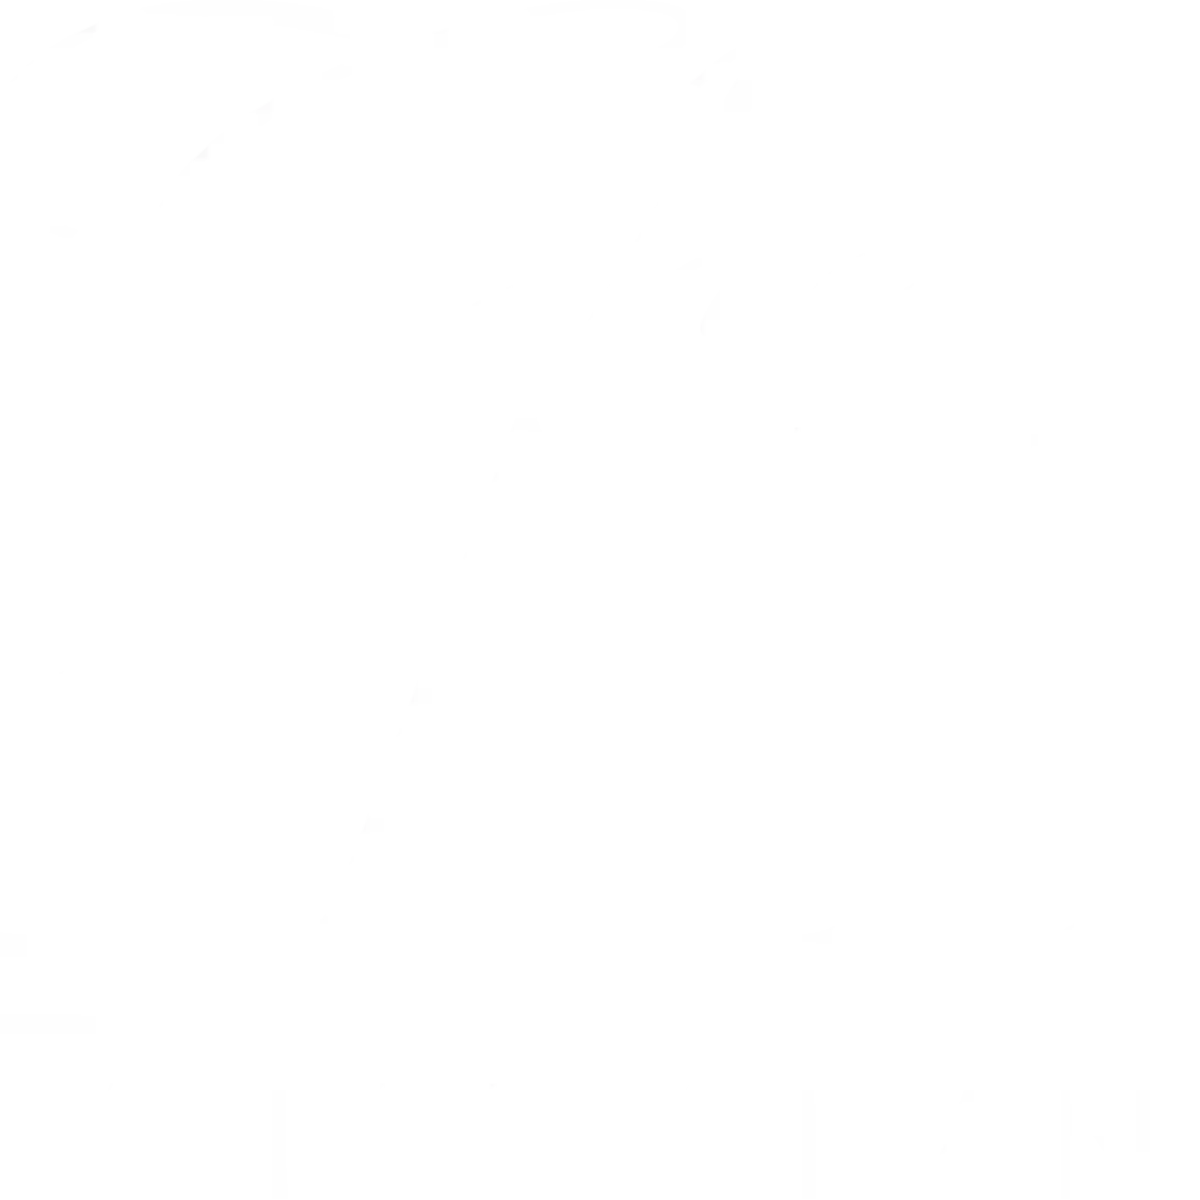 The Trails of Valley Ranch